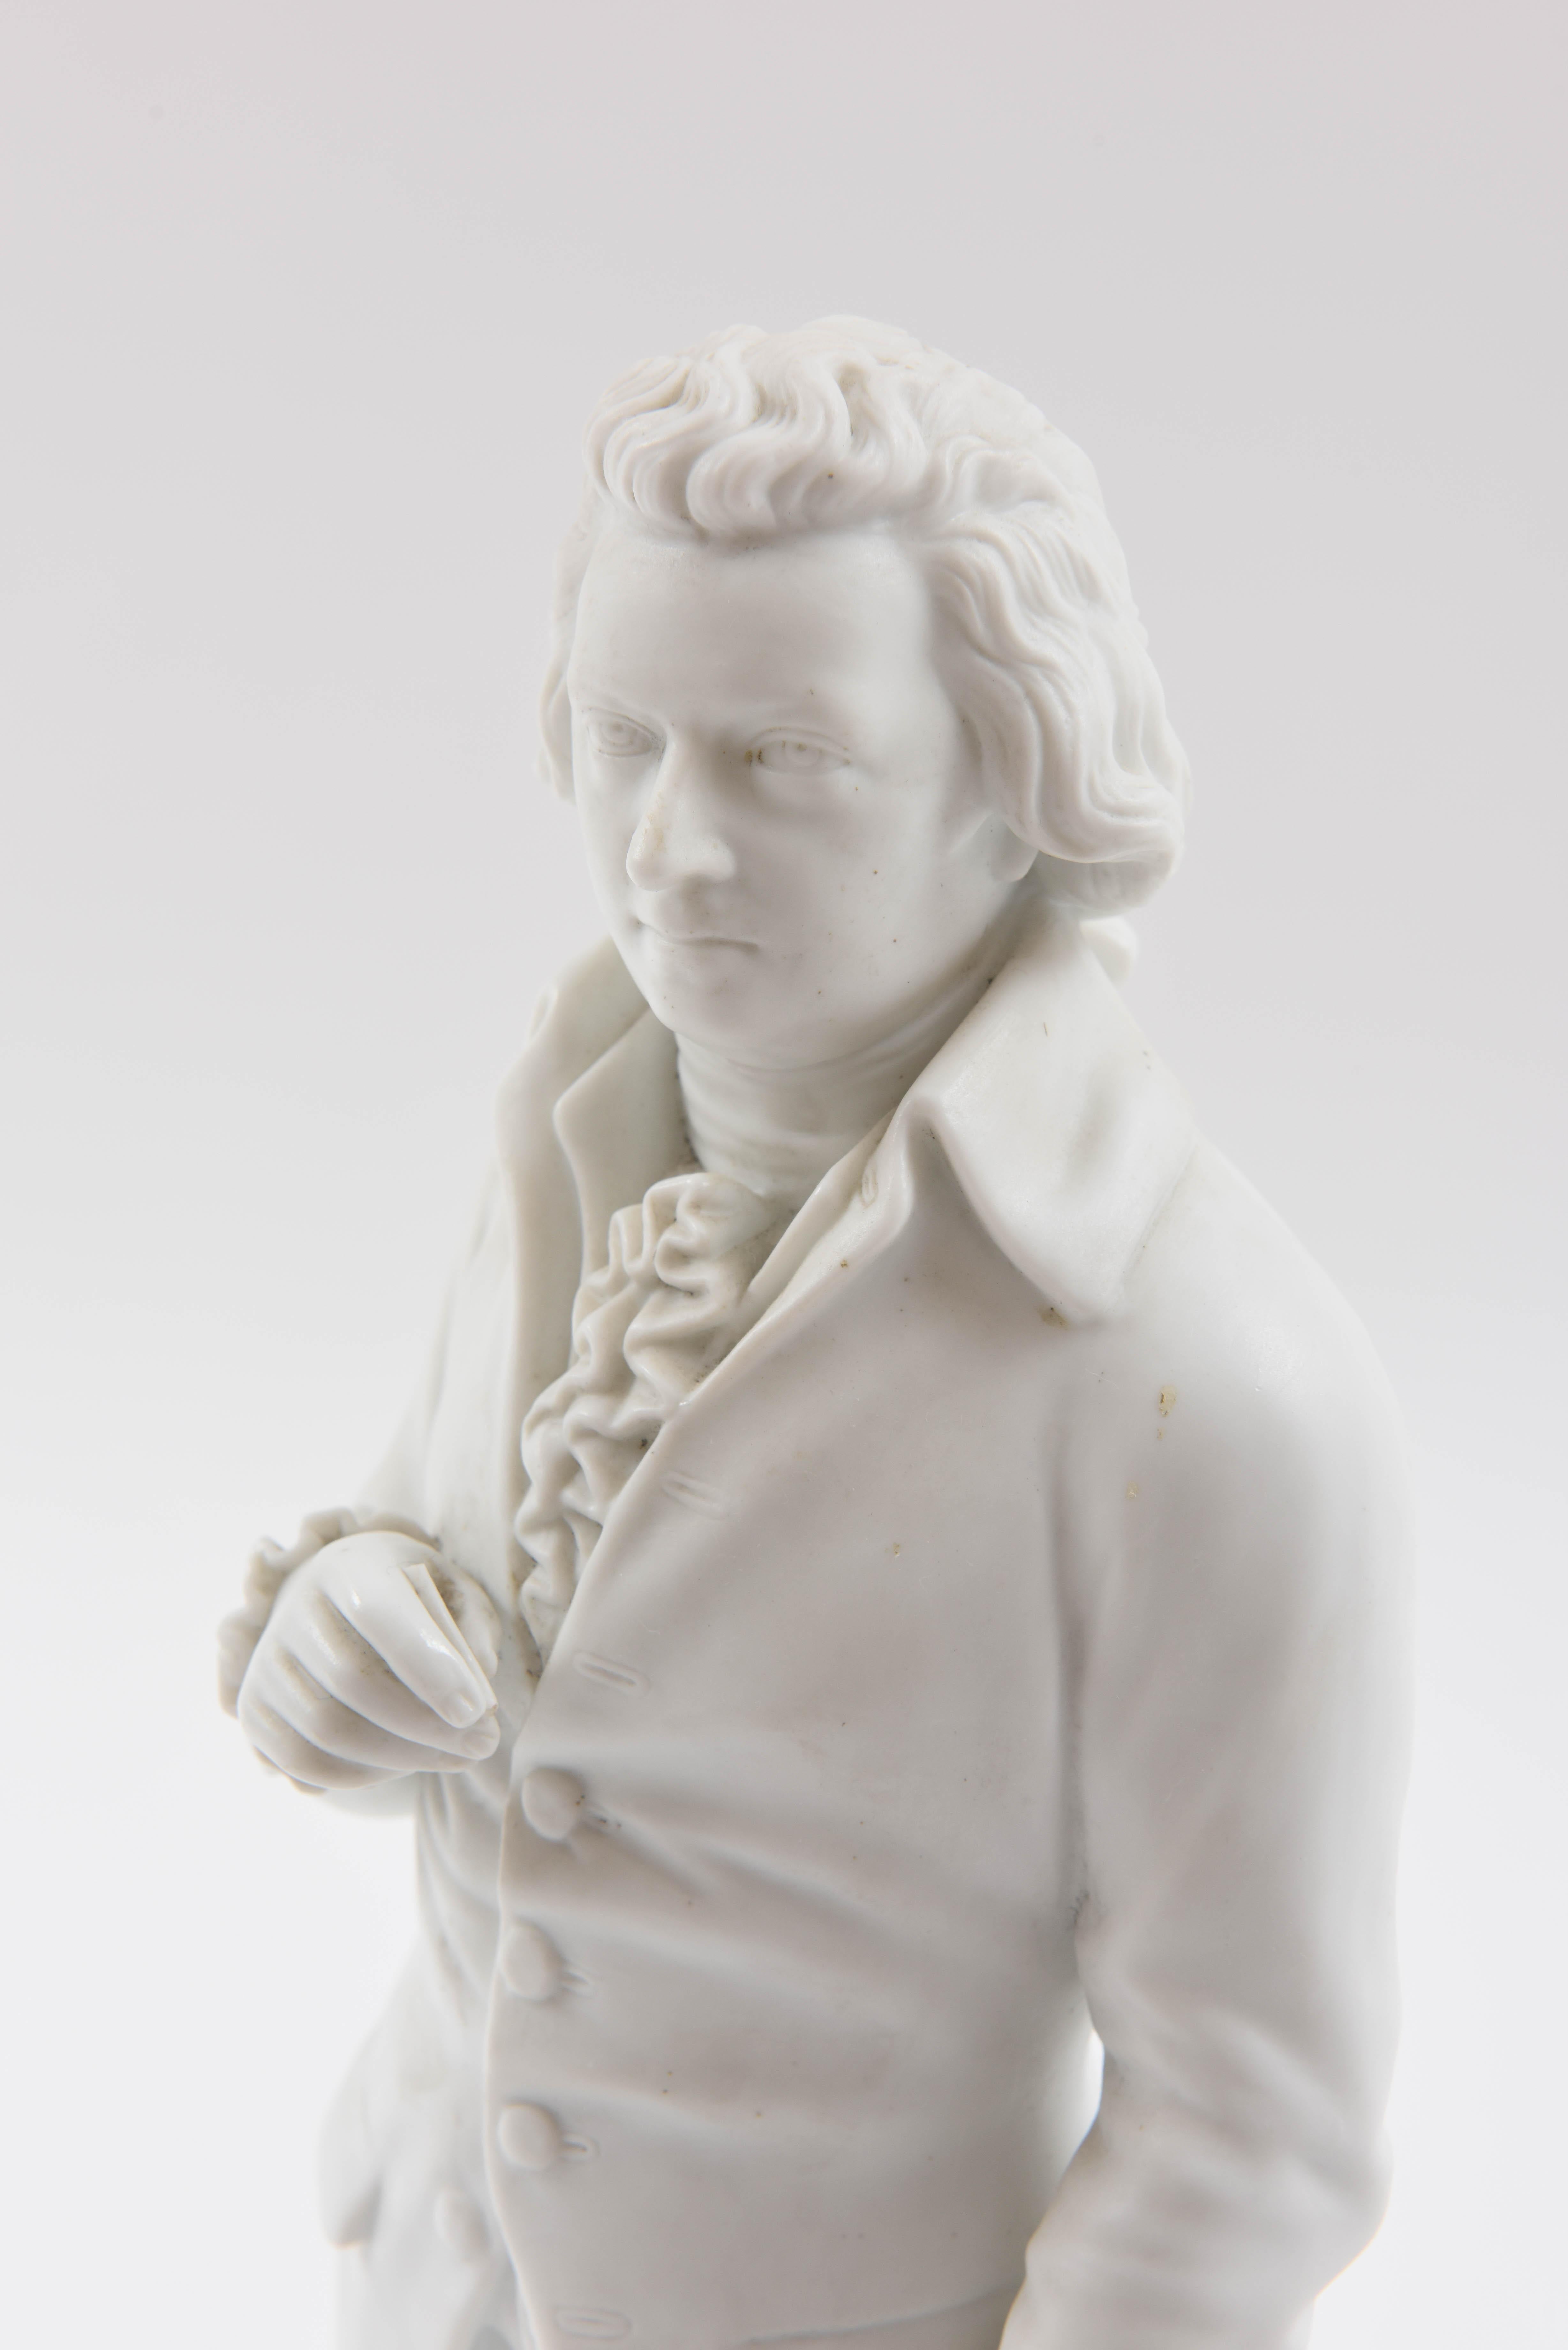 Mozart White Parian Figure, 19th Century, Tall and Regal 2